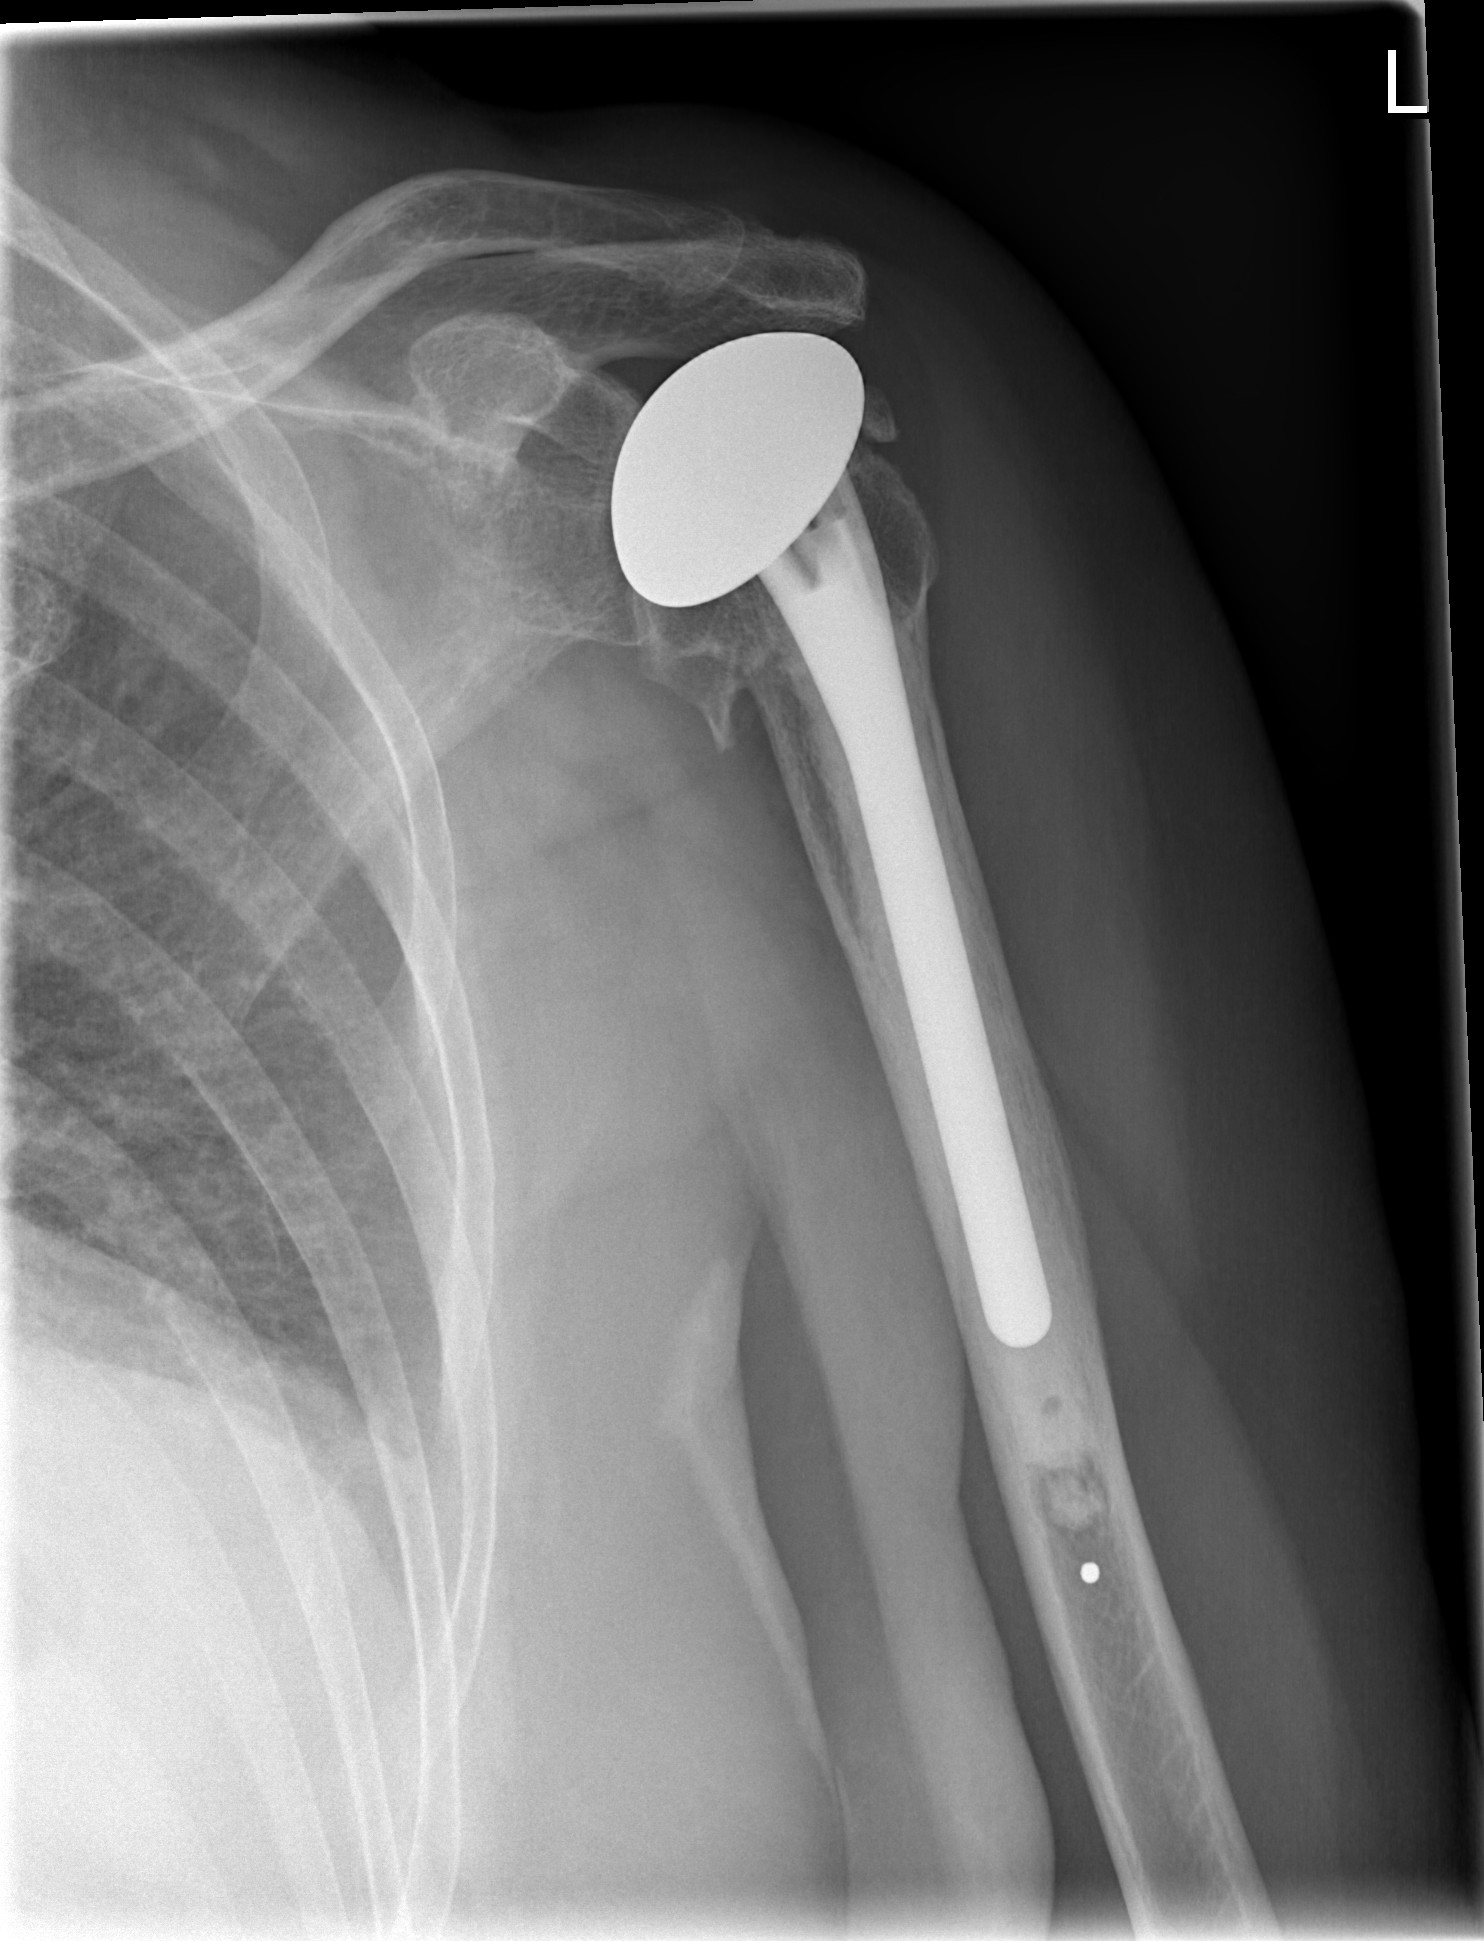 SHOULDER REPLACEMENT SURGERY TO FIX A ROTATOR CUFF TEAR - IS IT REQUIRED?